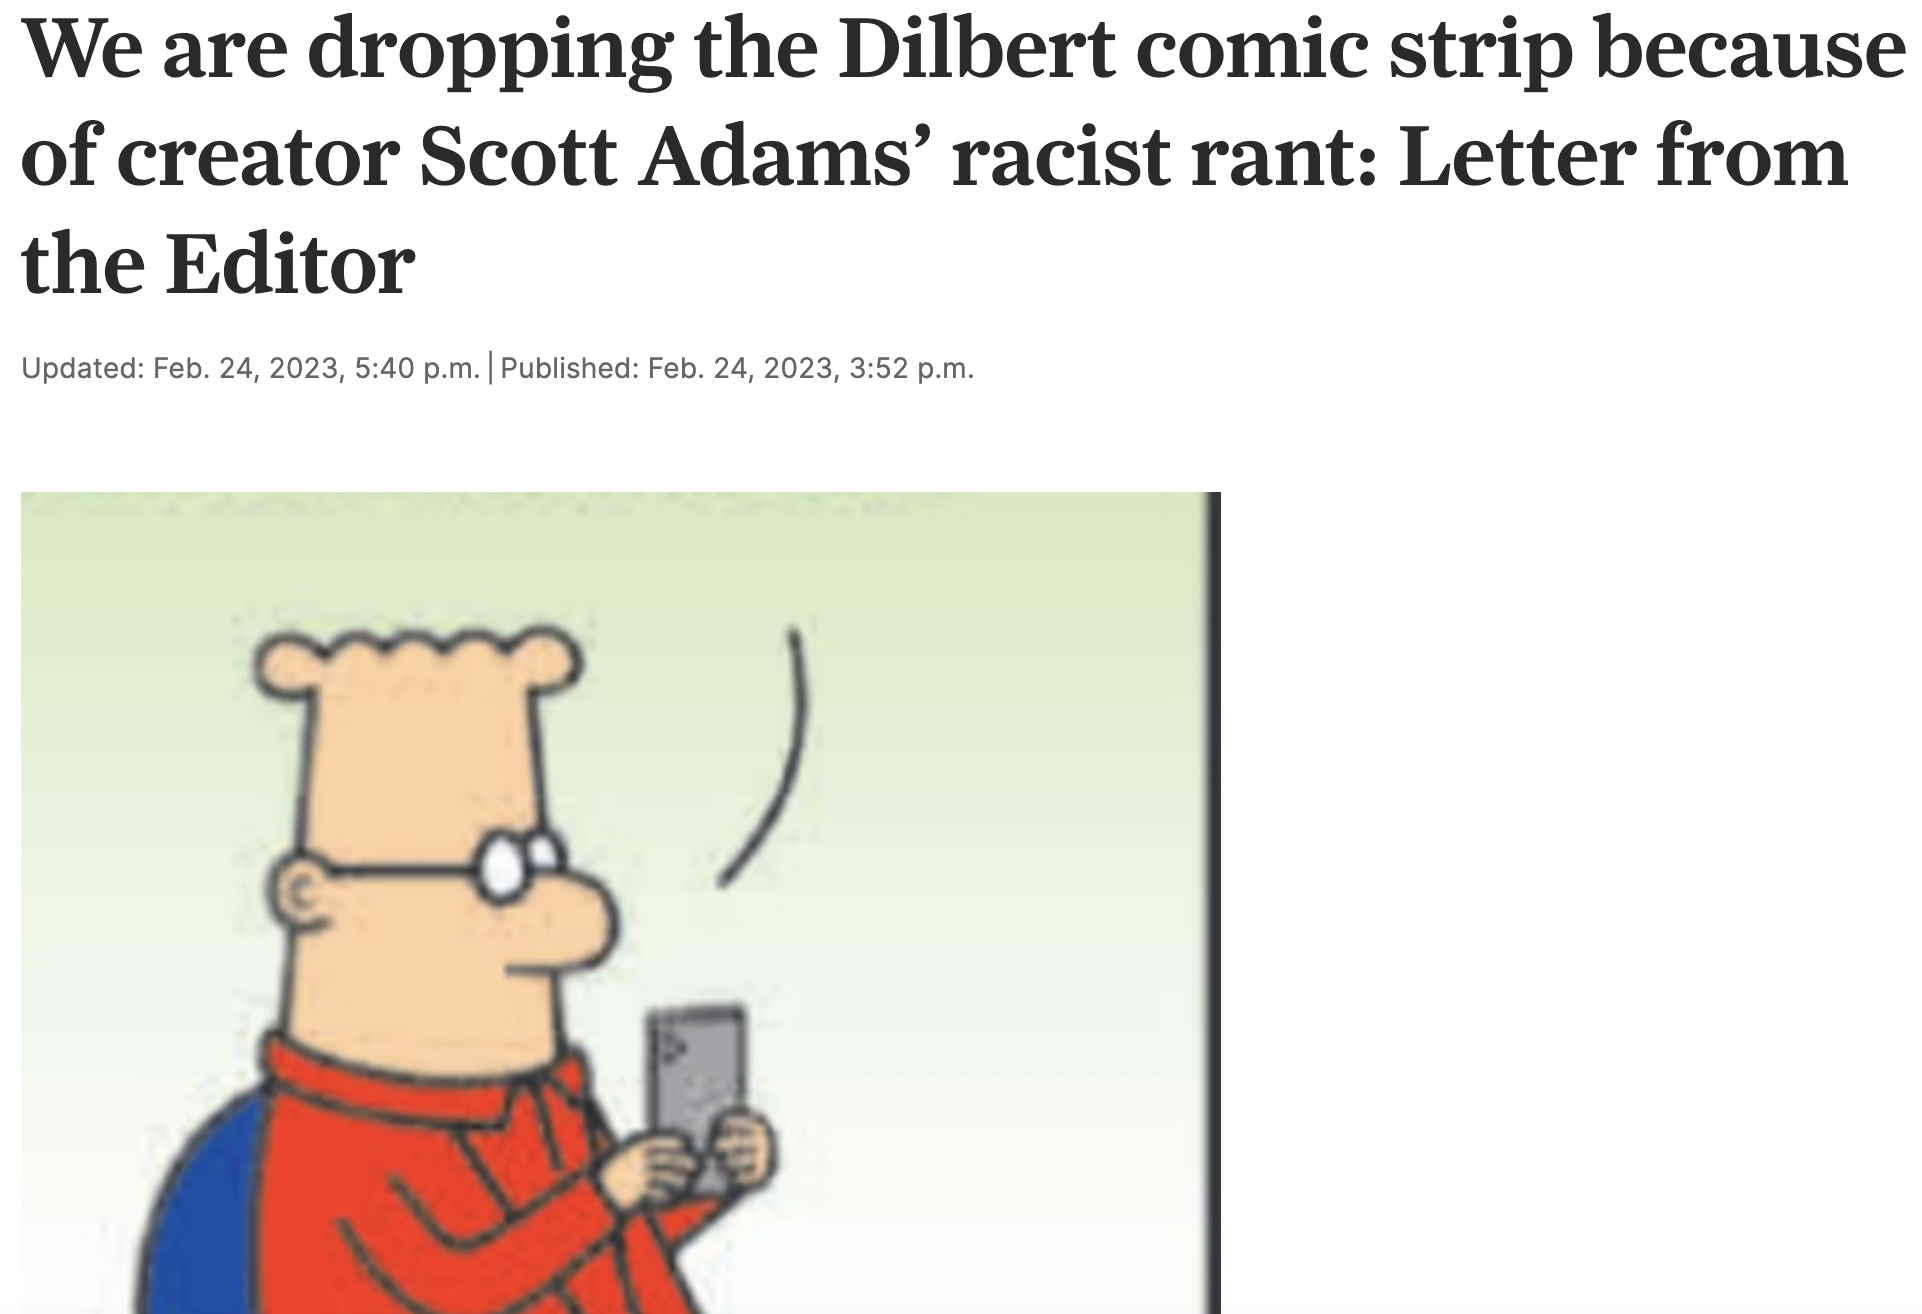 dilbert comic strip - We are dropping the Dilbert comic strip because of creator Scott Adams' racist rant Letter from the Editor Updated Feb. 24, 2023, p.m. | Published Feb. 24, 2023, p.m.